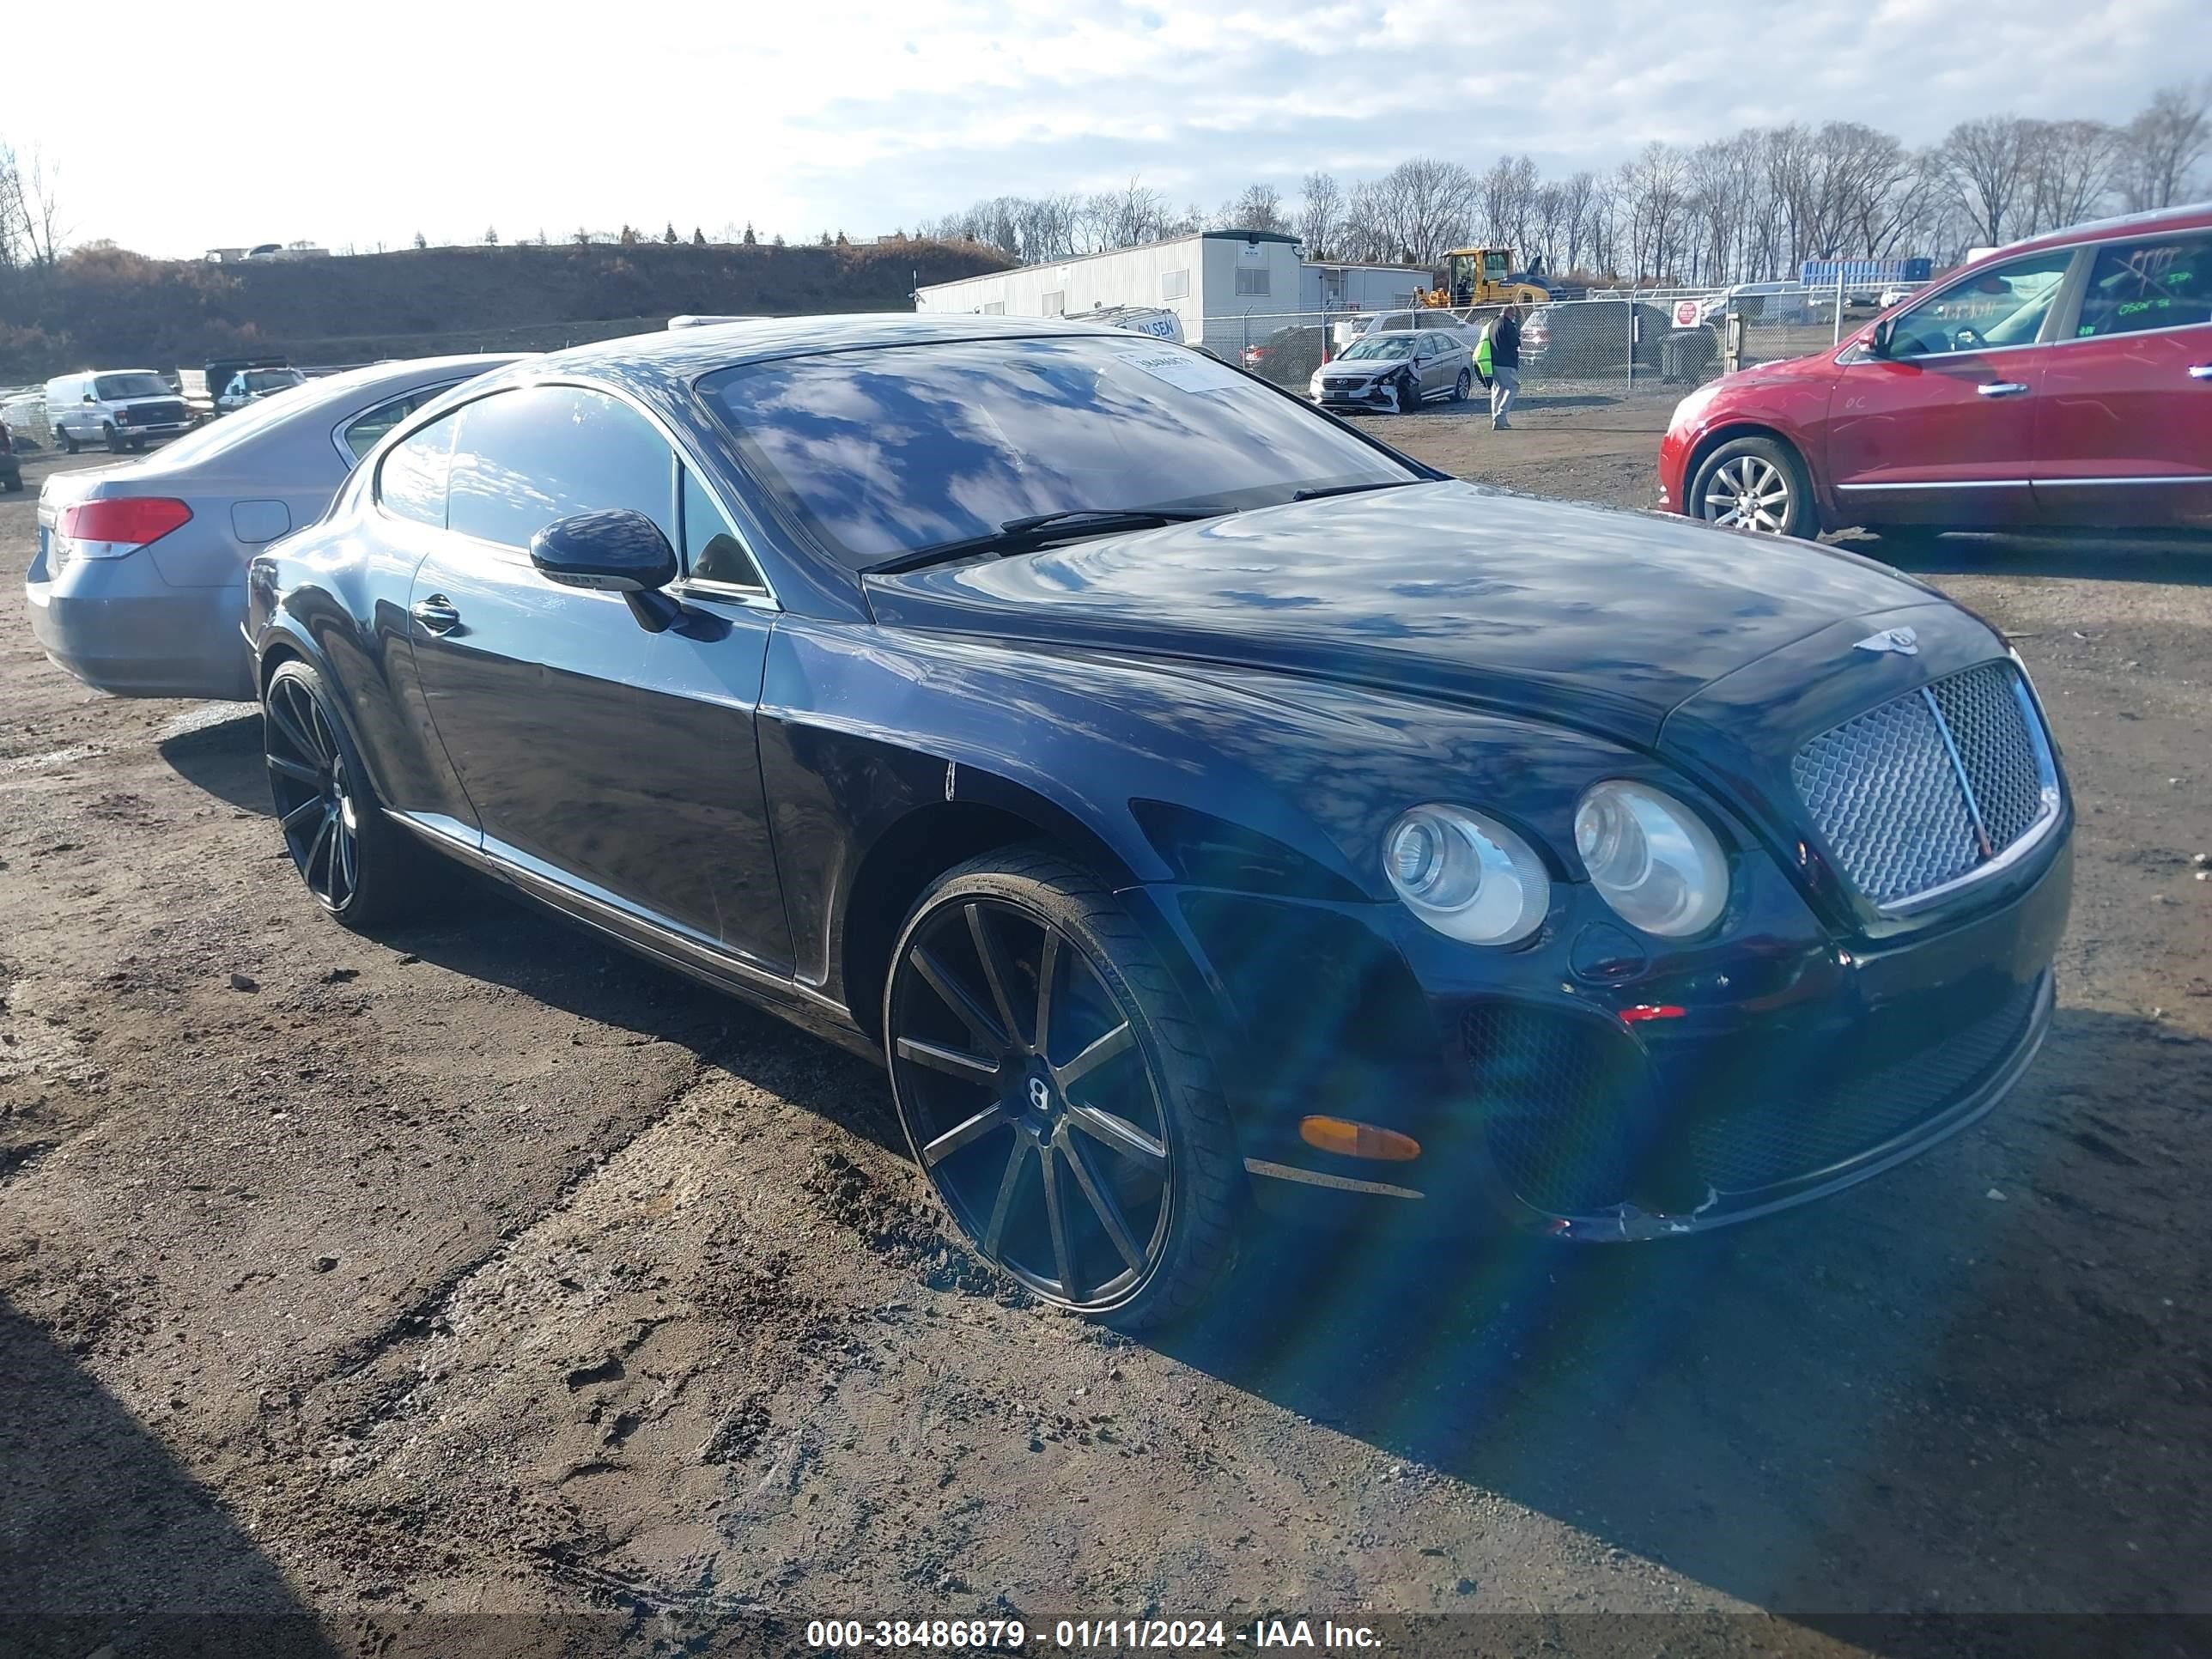 vin: SCBCR63W56C030501 SCBCR63W56C030501 2006 bentley continental gt 6000 for Sale in 07865, 985 State Route 57, Port Murray, USA